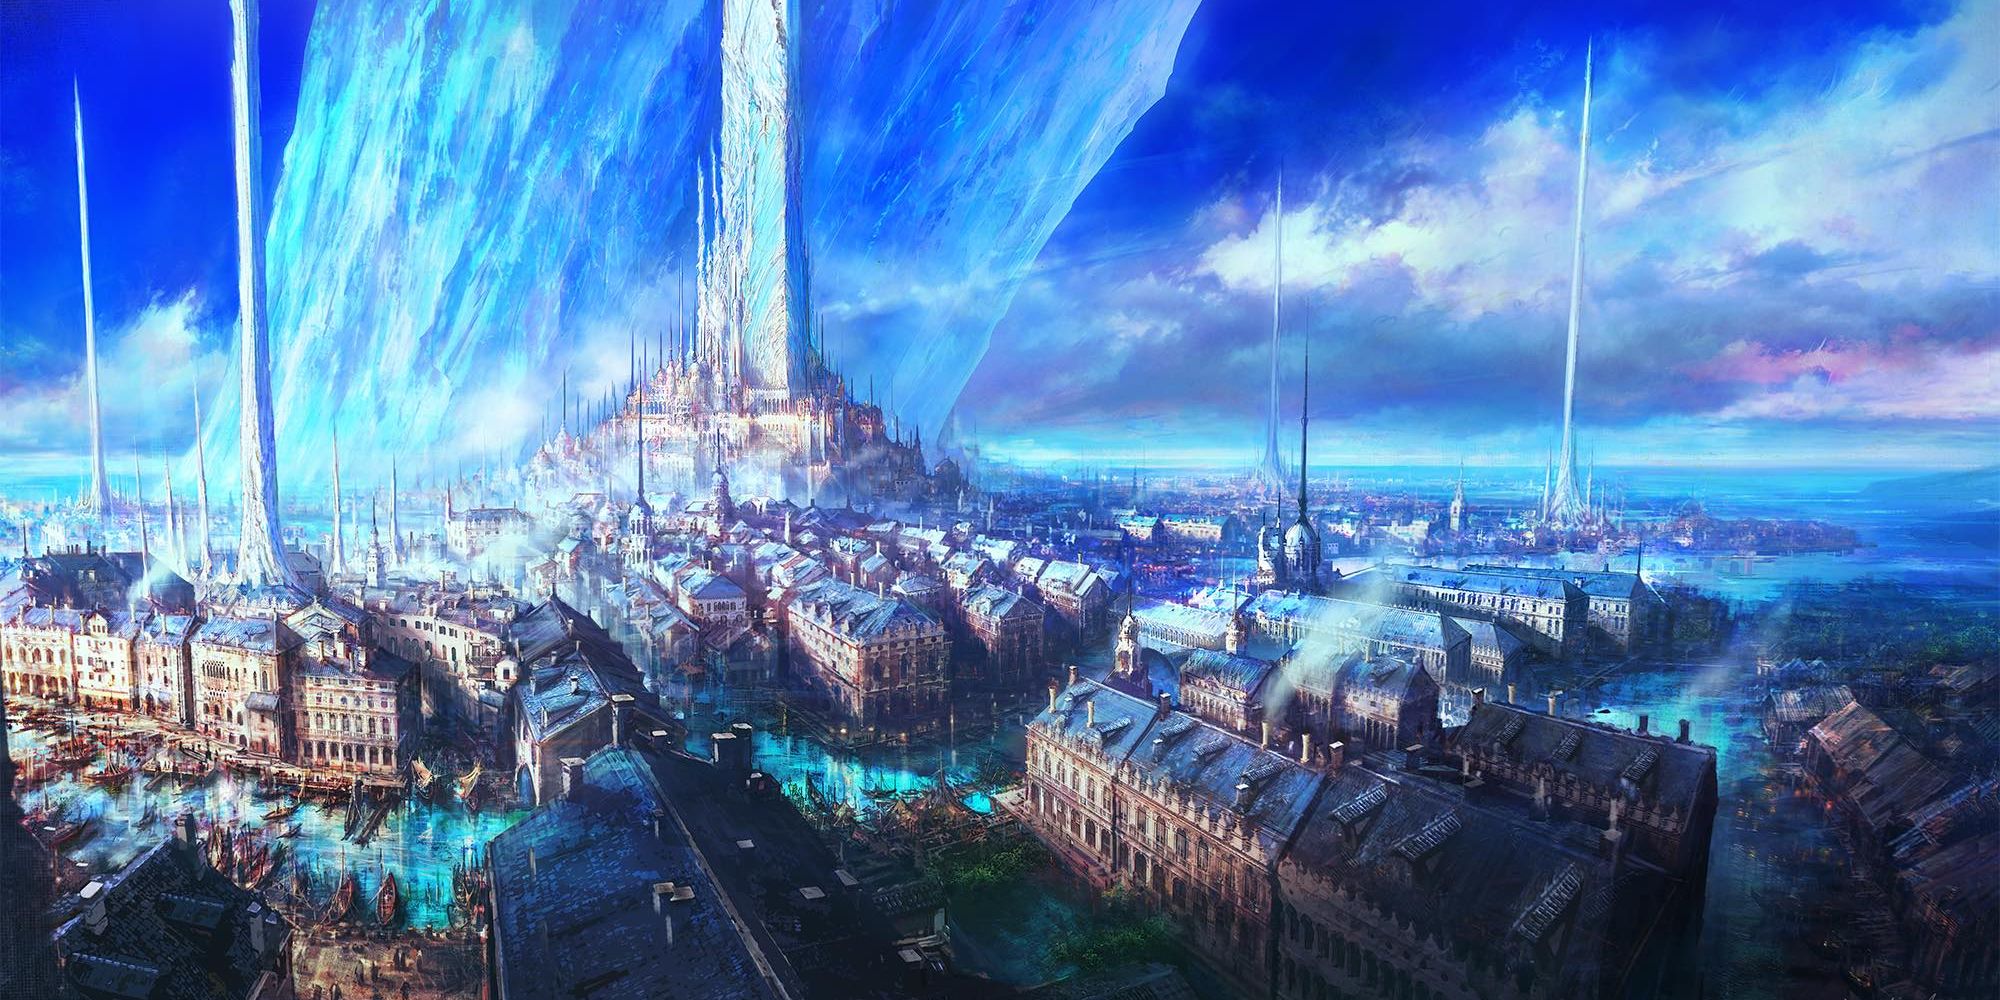 An illustration of a town in Final Fantasy 16, showing European-style buildings, canals, and tall, white spires rising in the distance